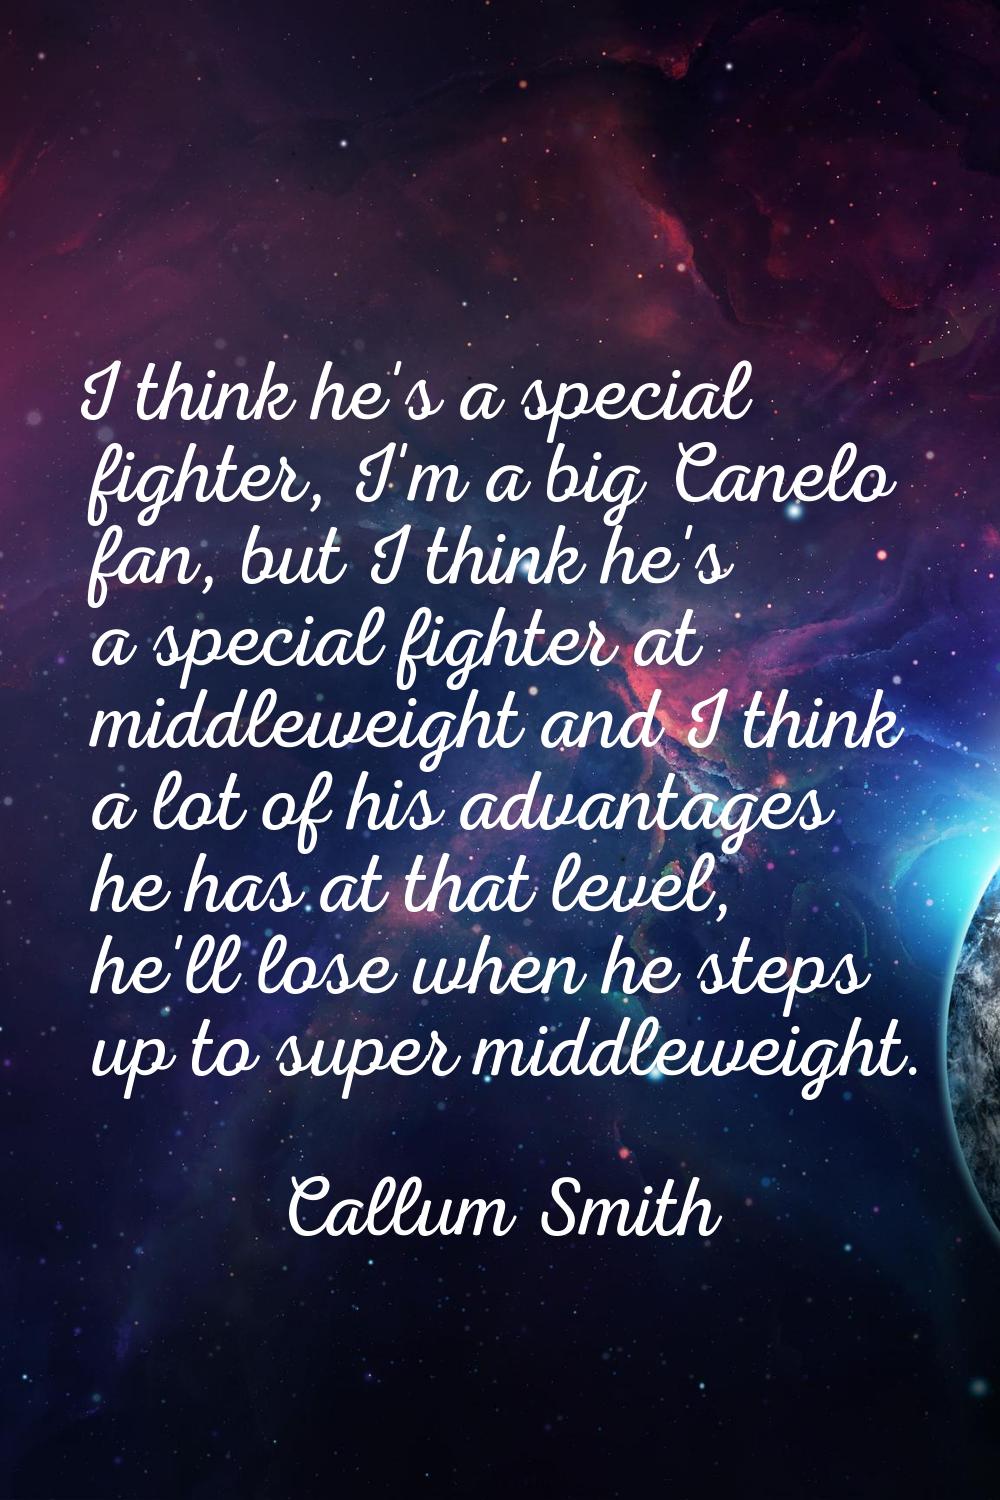 I think he's a special fighter, I'm a big Canelo fan, but I think he's a special fighter at middlew